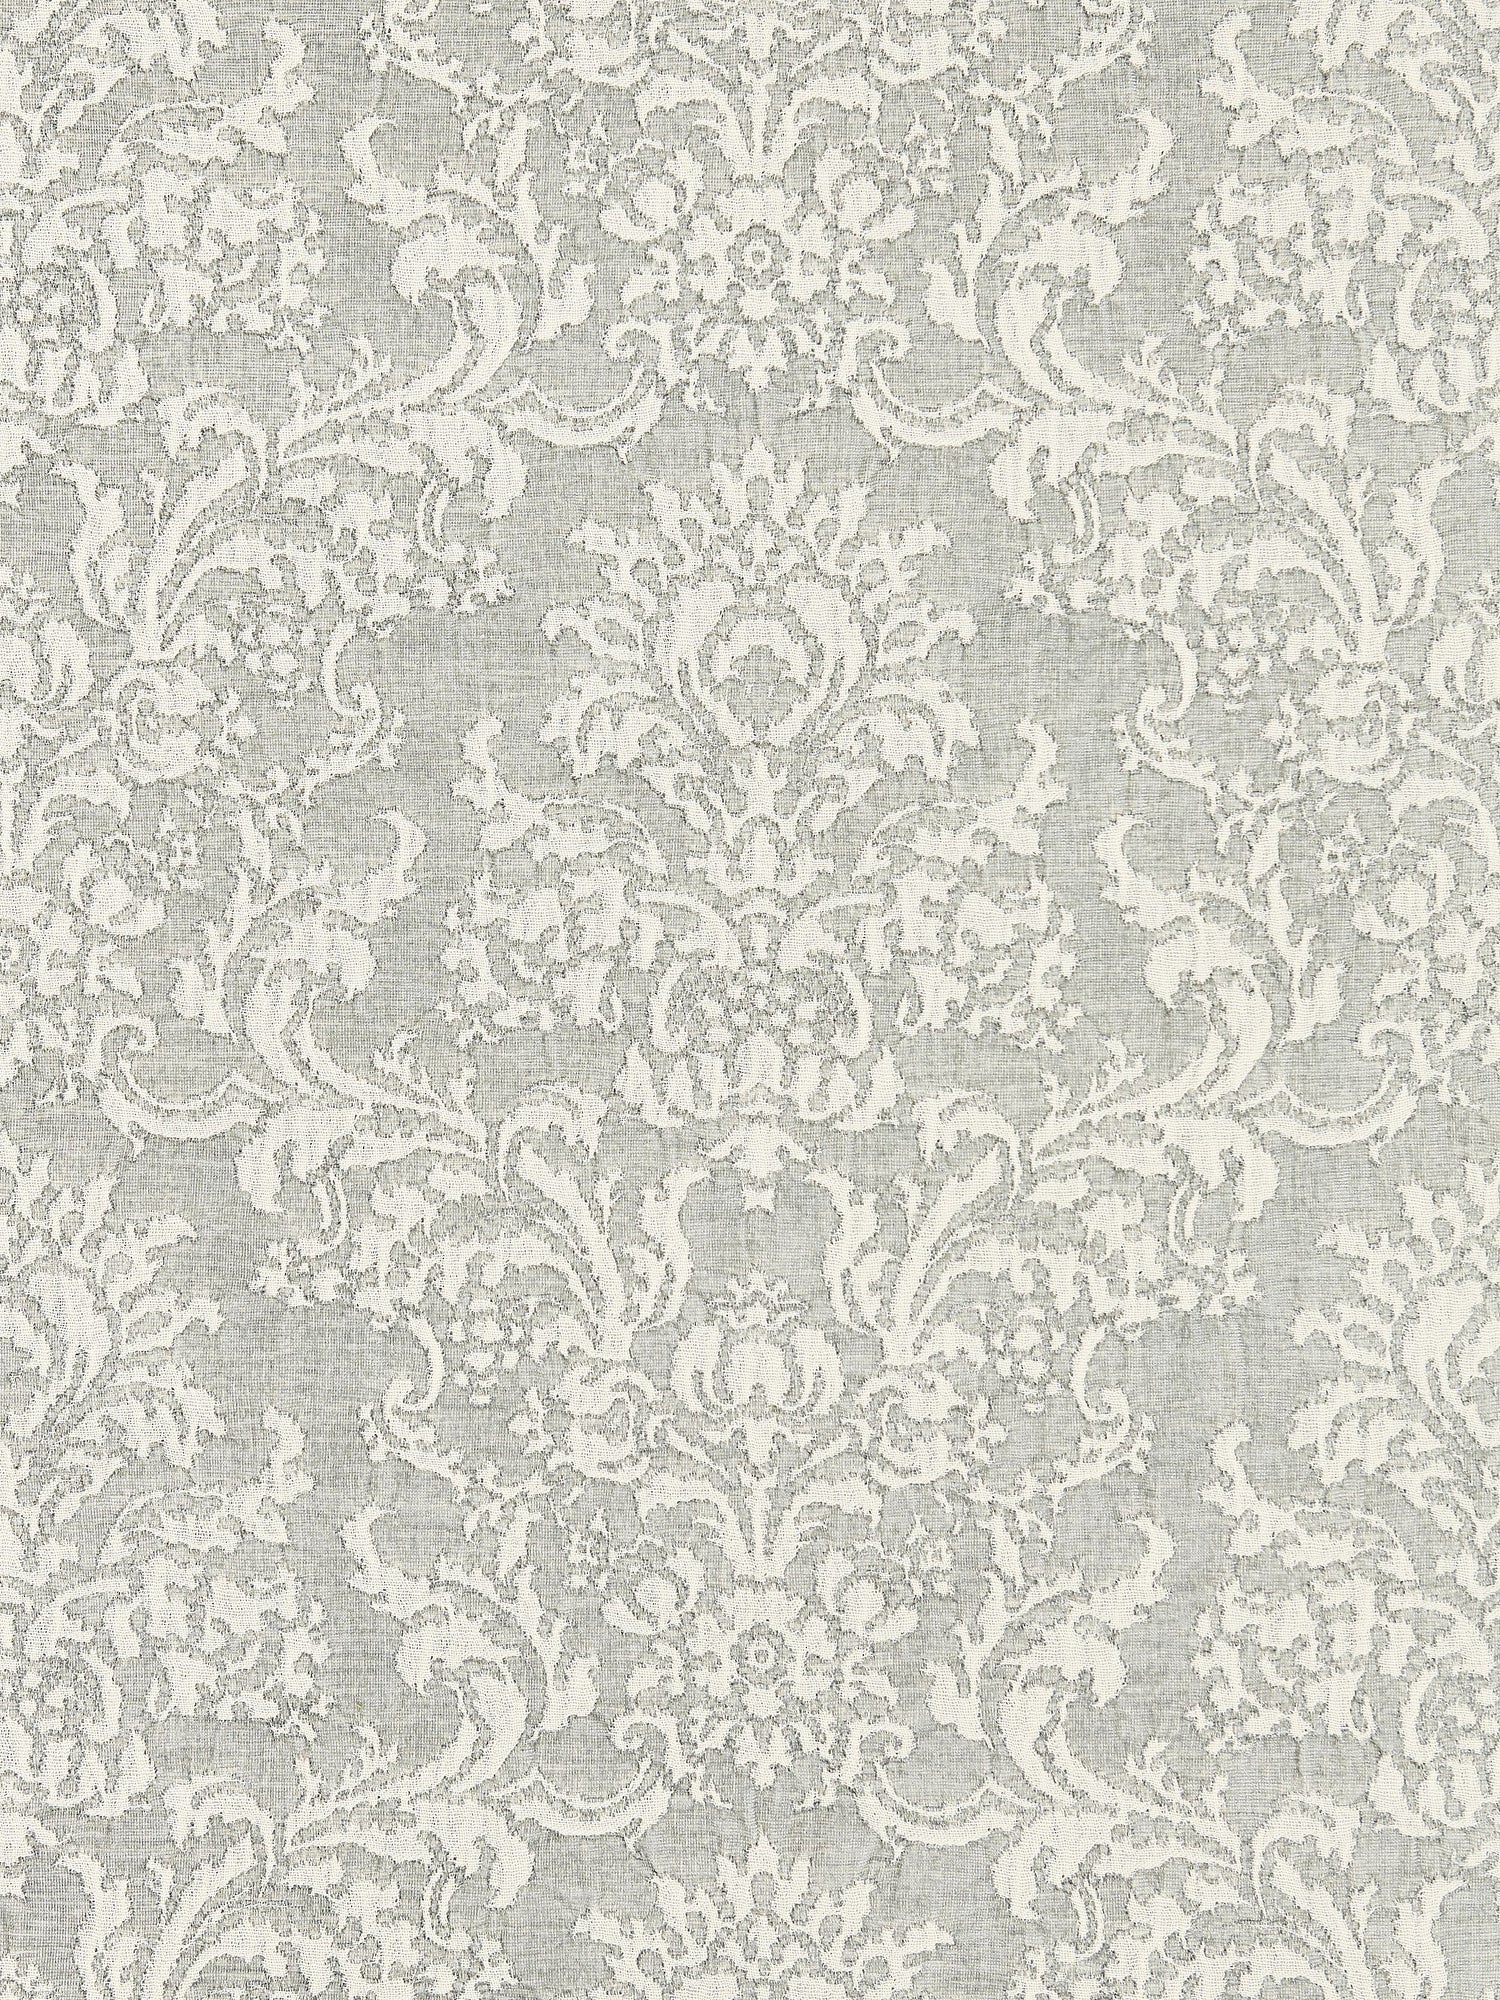 San Luca Damask fabric in pearl grey color - pattern number SC 000327094 - by Scalamandre in the Scalamandre Fabrics Book 1 collection